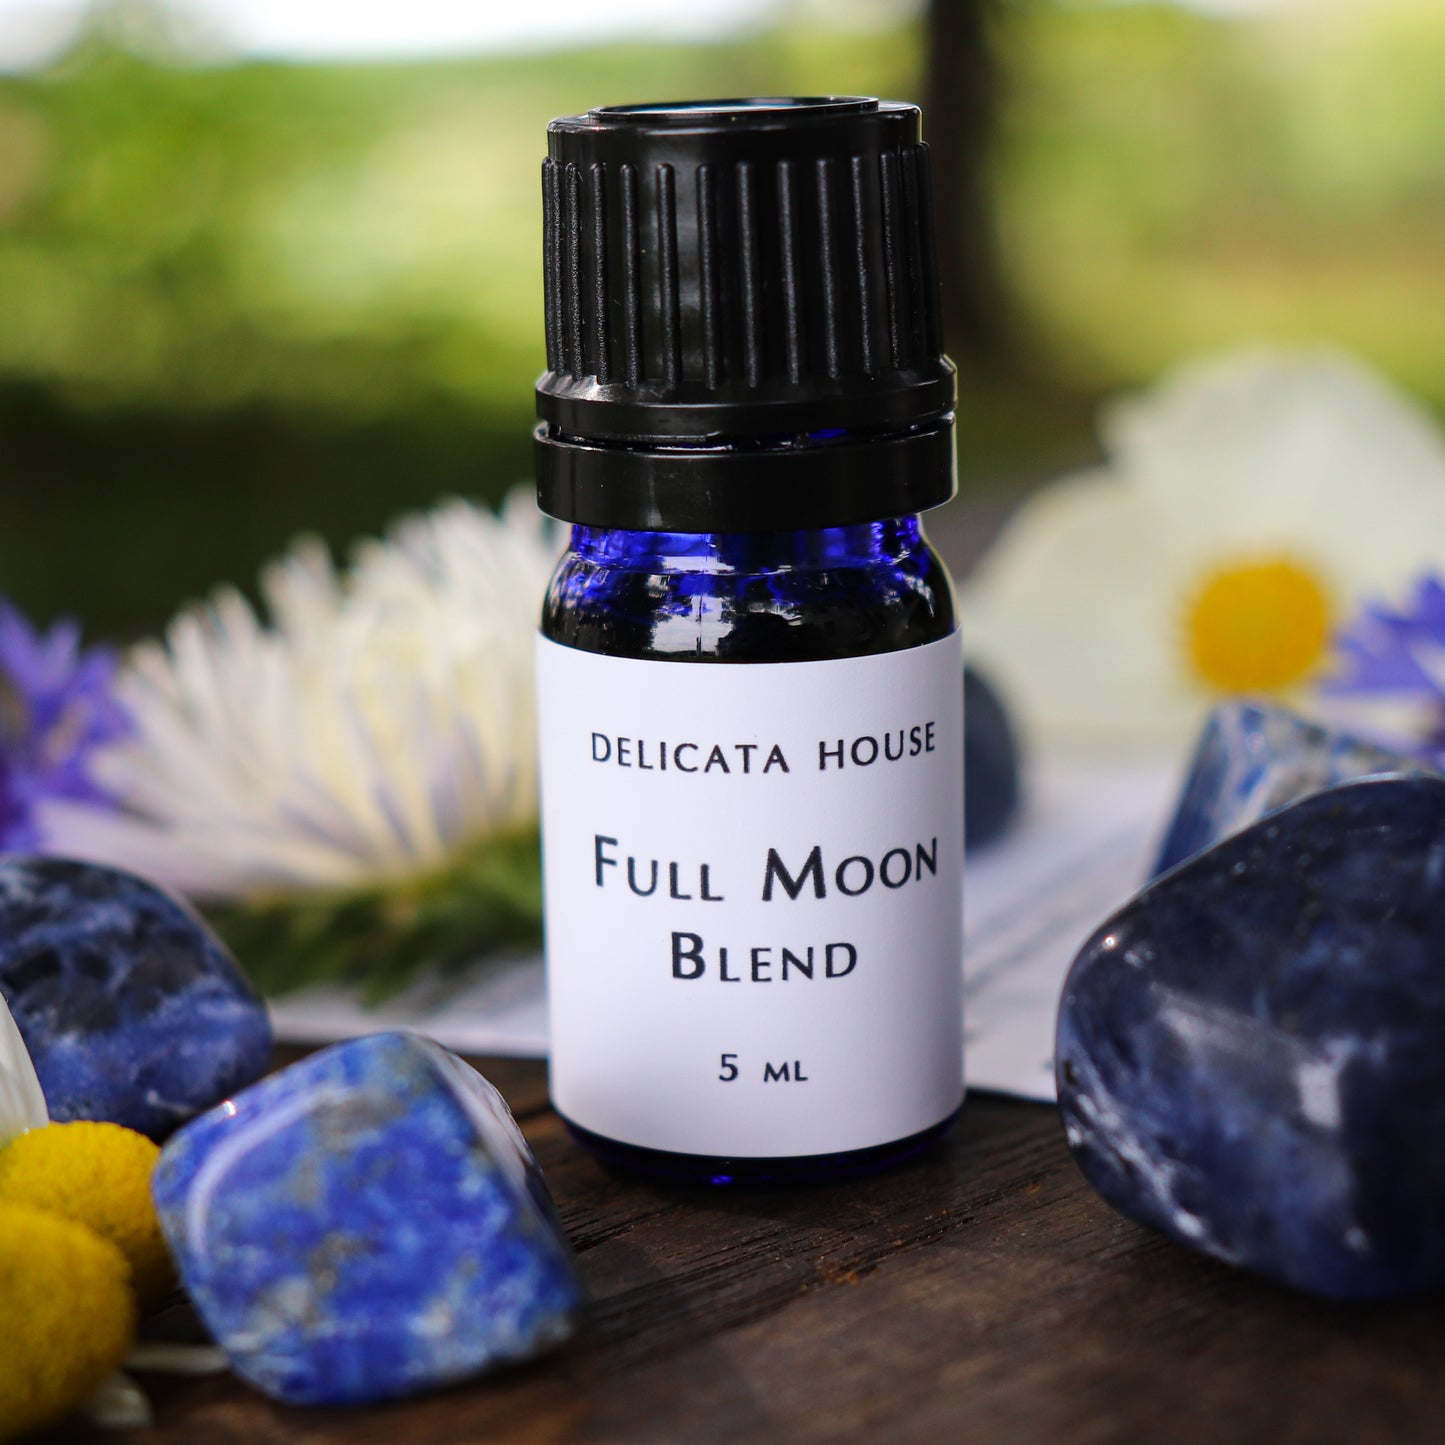 Diffuser Blend - Full Moon Diffuser and Crystals Set - Full Moon Diffuser Blend and Sodalite and Lapis Lazuli crystals - Moon Ritual Set - Moon Aromatherapy - Gift Set for Her - Teen Girl Gift - Friend Gift